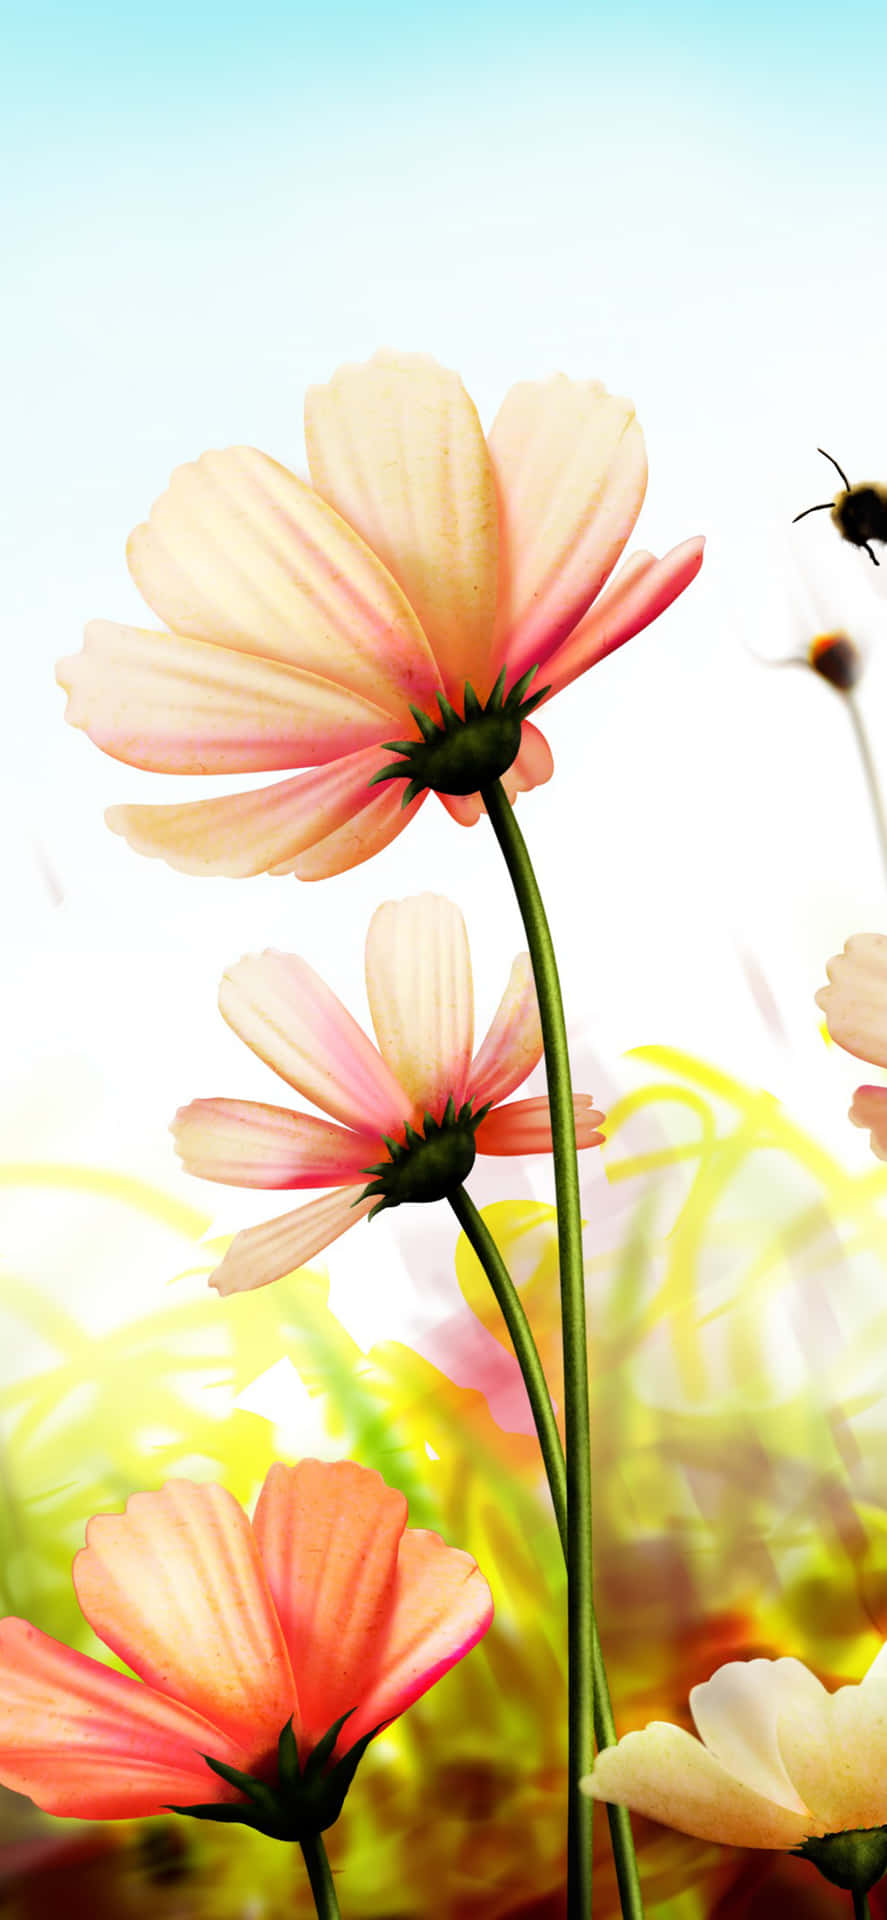 Blooming Pink Spring Daisy iPhone Wallpaper